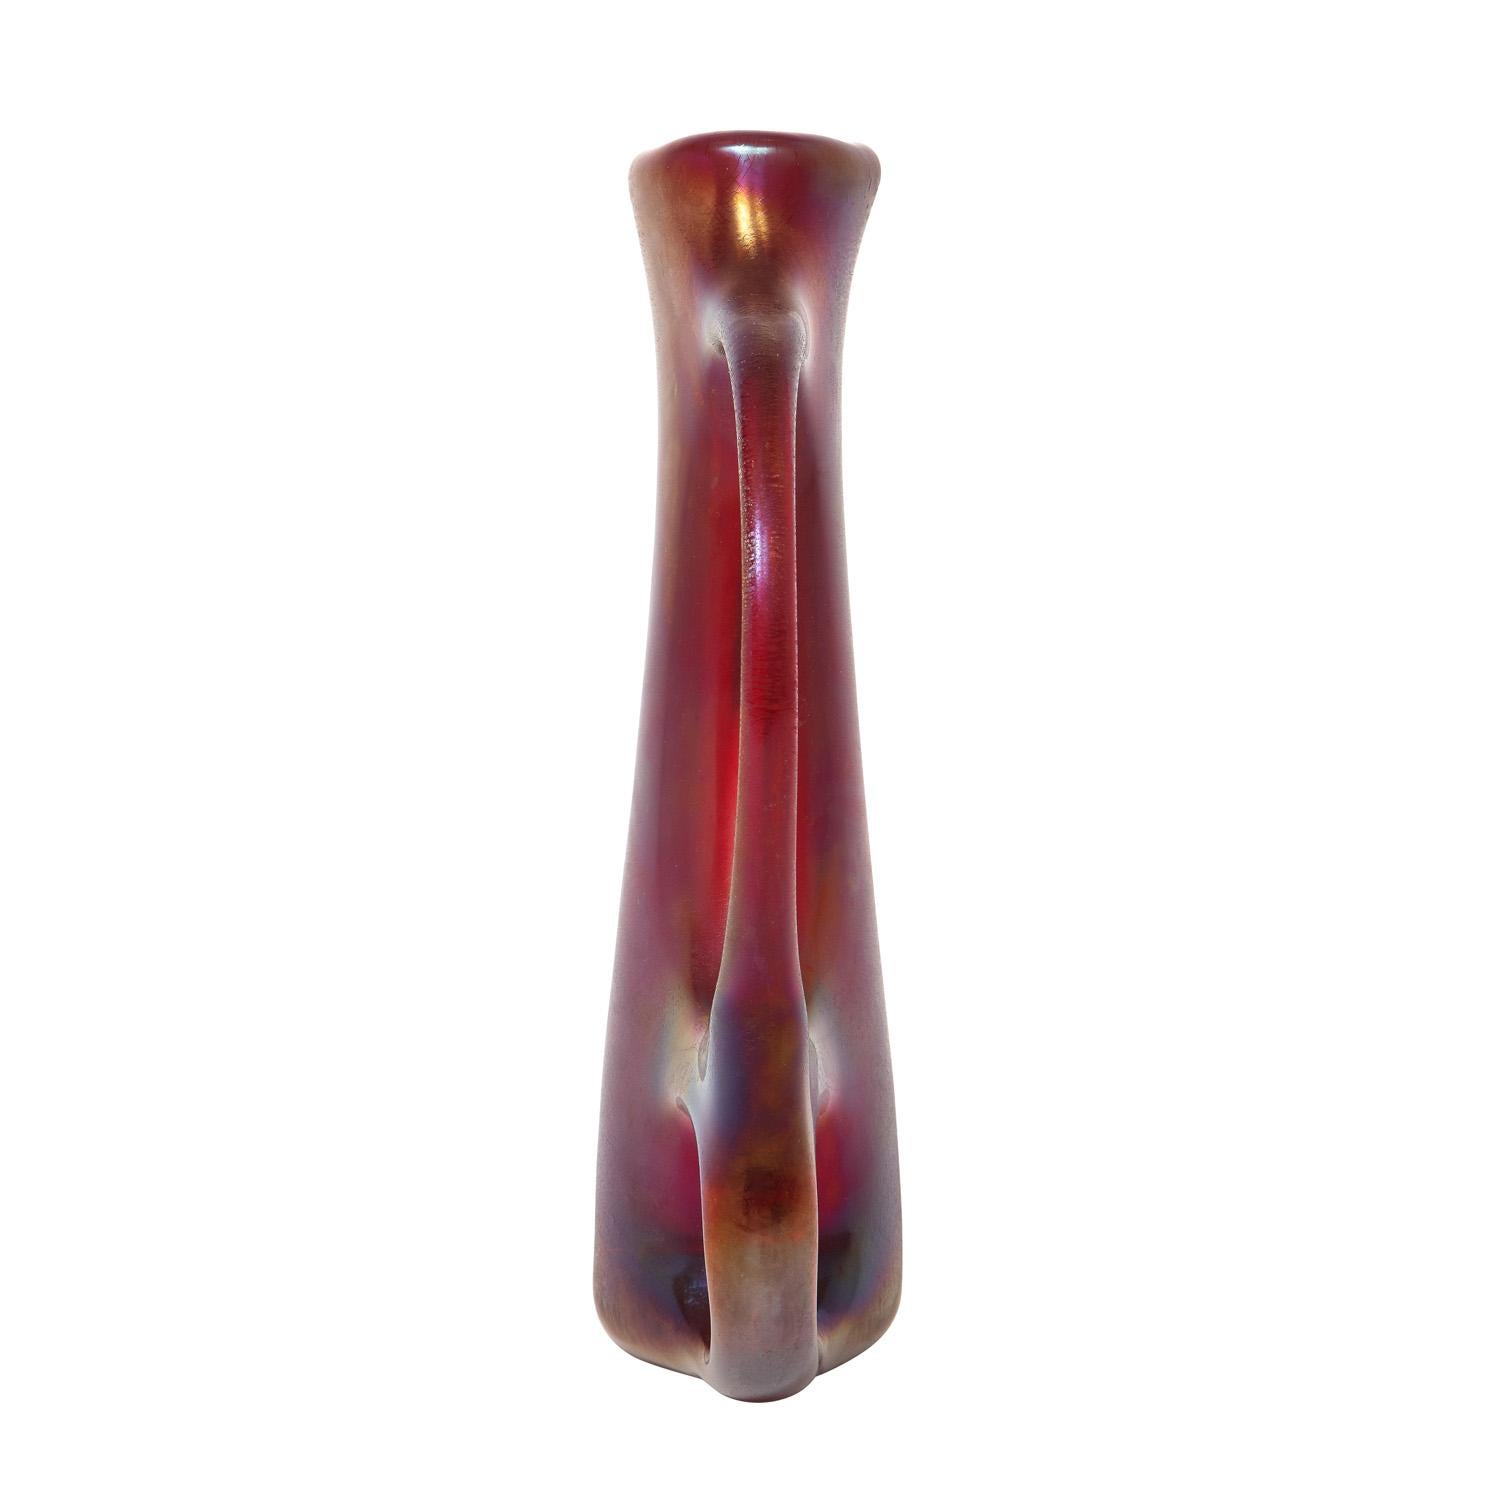 Hand-blown red glass vase from the 